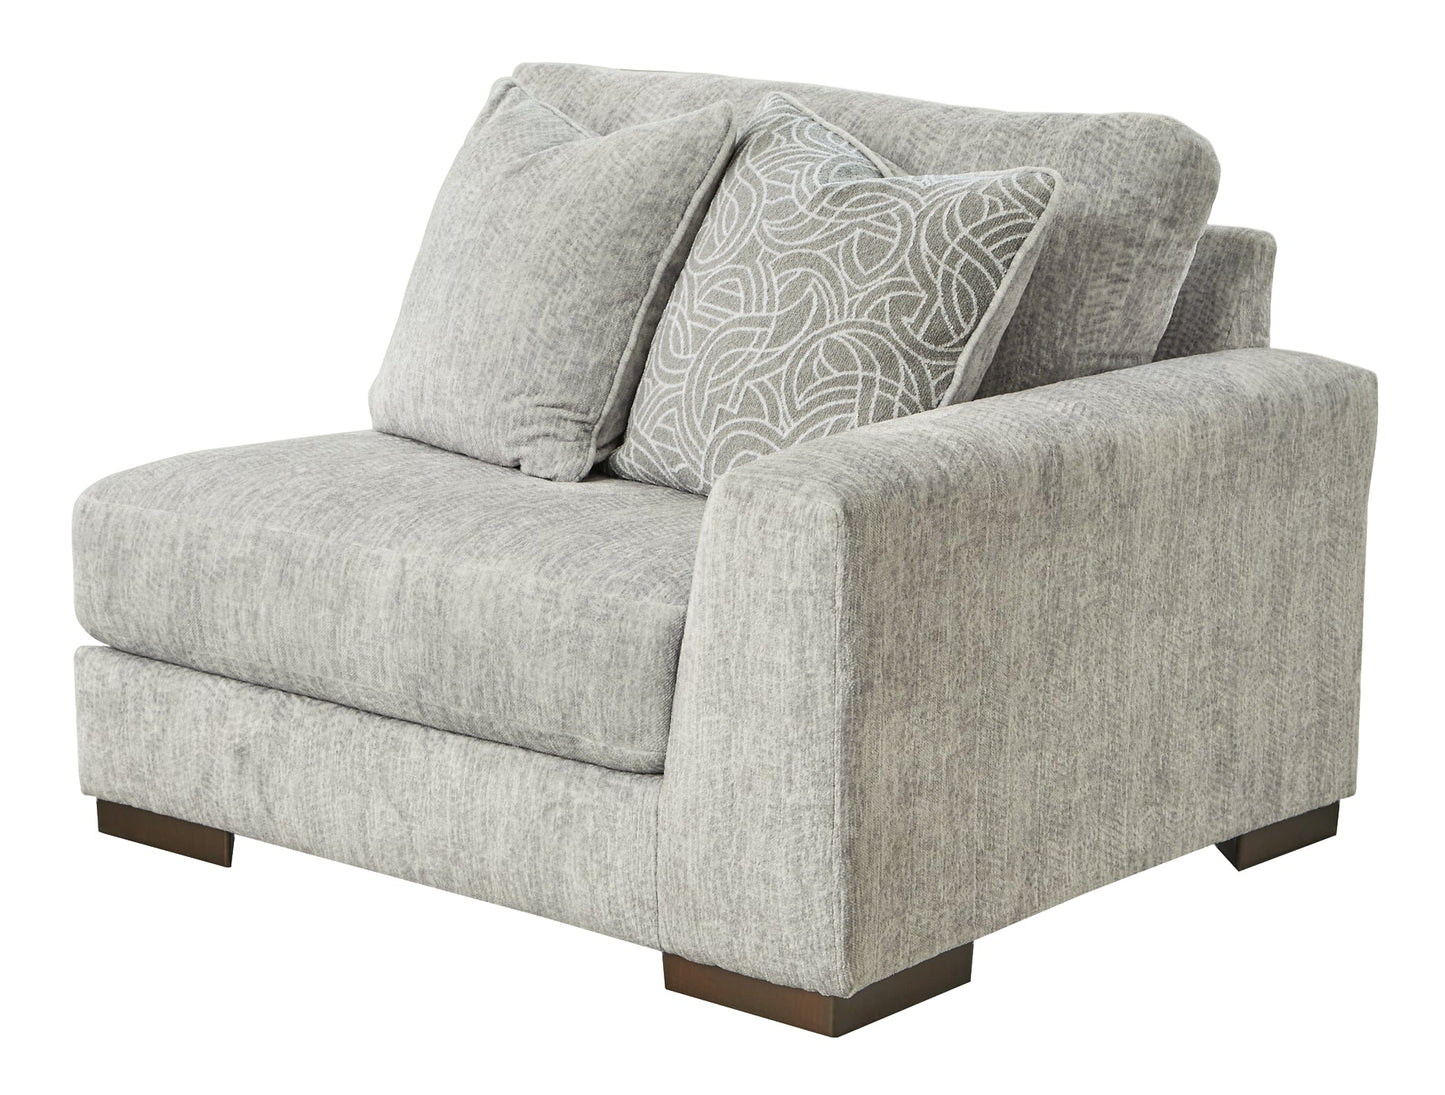 Regent Park 4-Piece Sectional with Ottoman at Walker Mattress and Furniture Locations in Cedar Park and Belton TX.